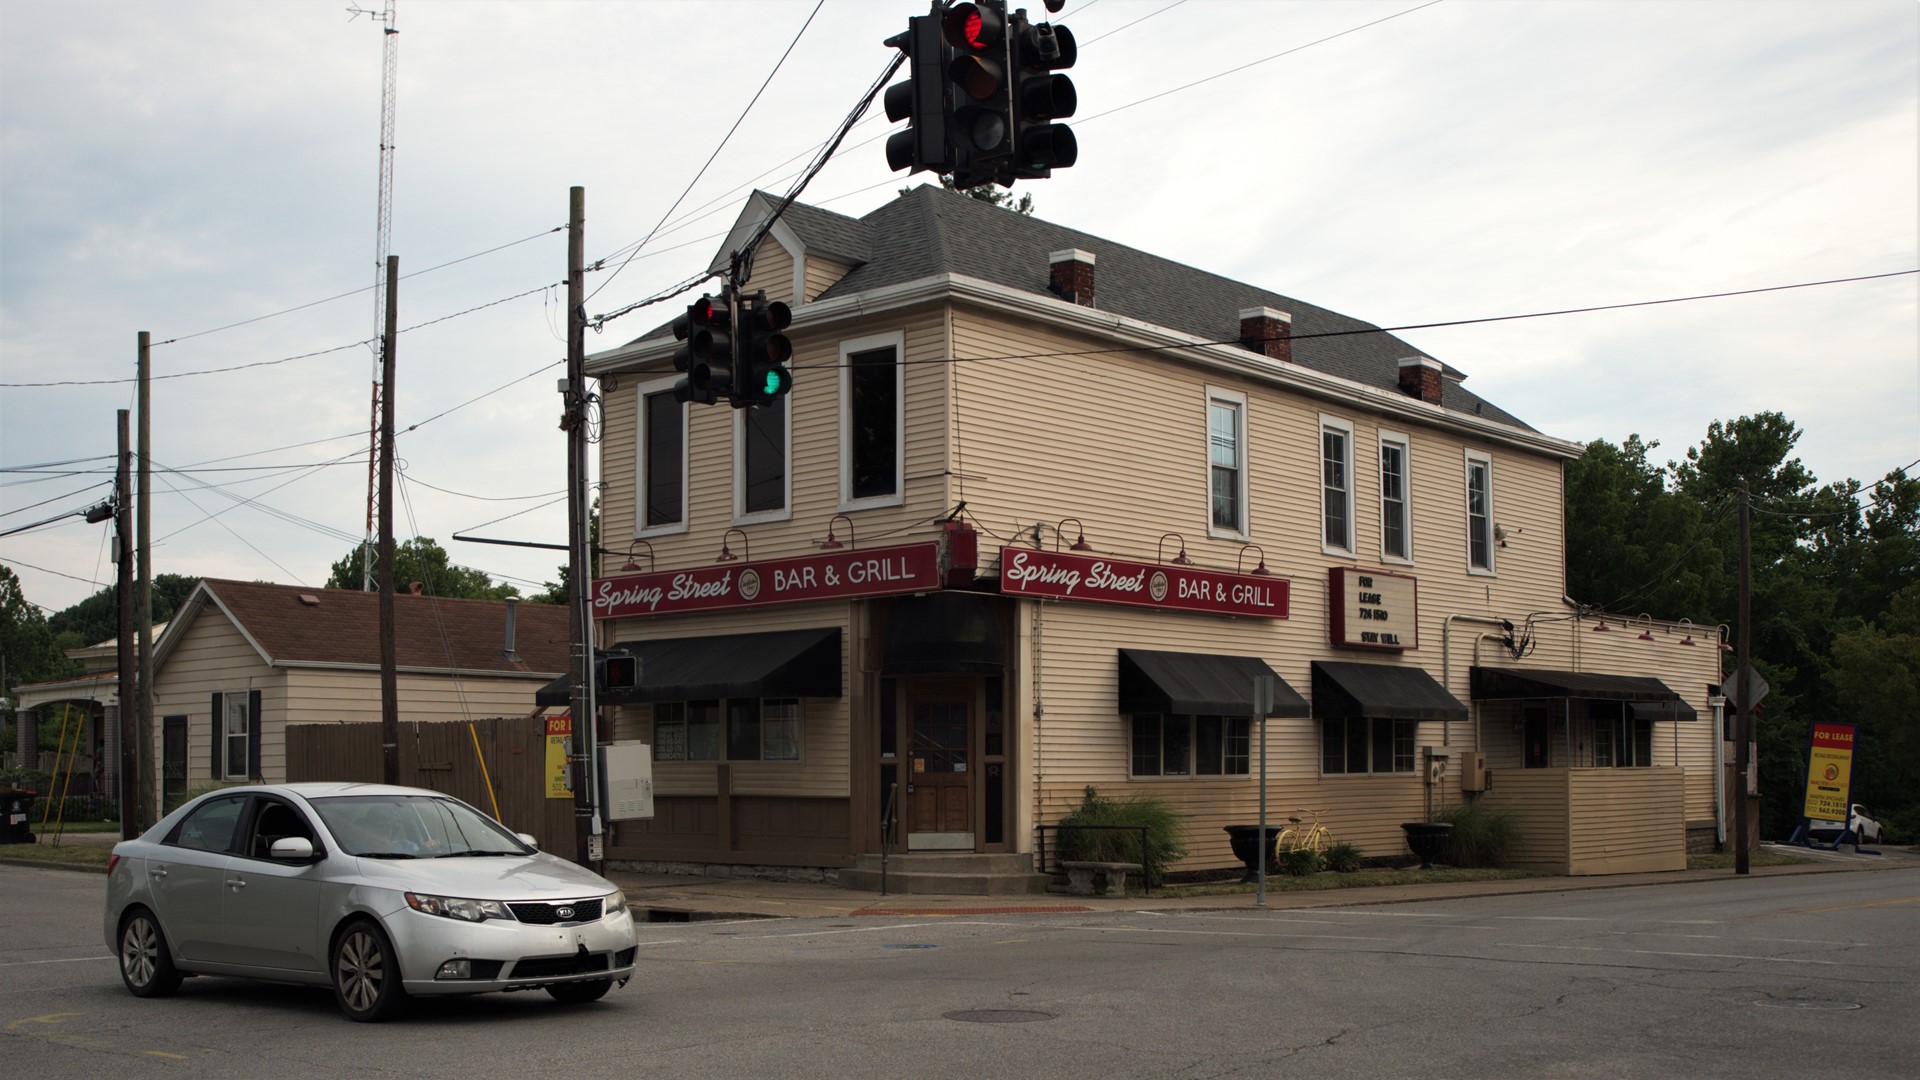 The popular Irish Hill bar and restaurant at the corner of Spring and Payne Streets closed in 2020 after 33 years in business.